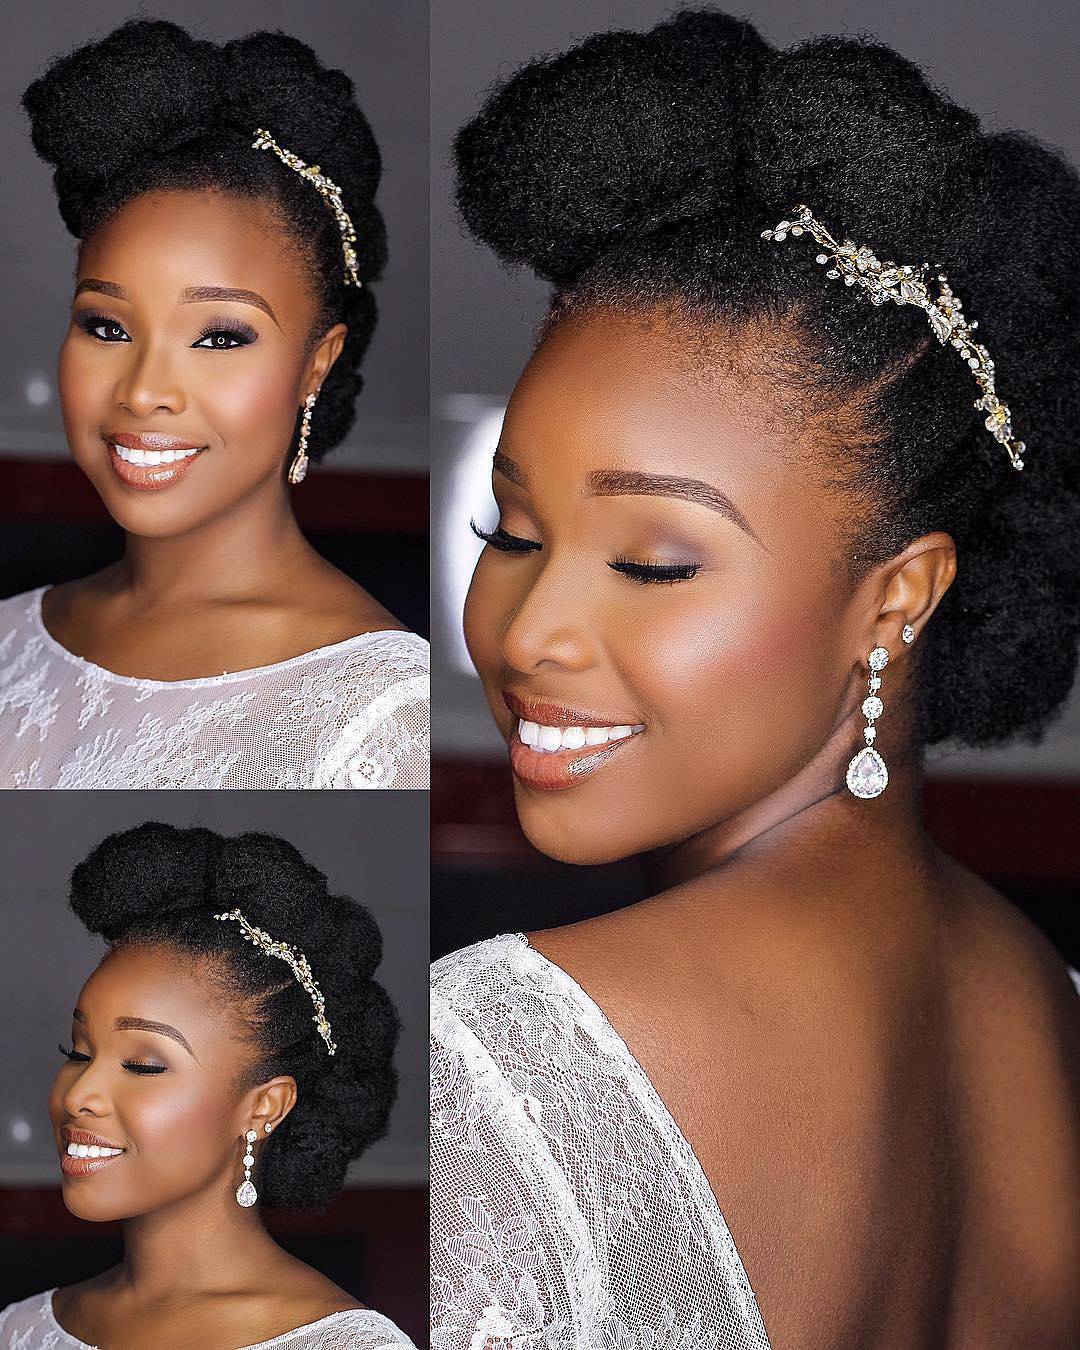 Bridal Hairstyles That Will Leave You Floored!